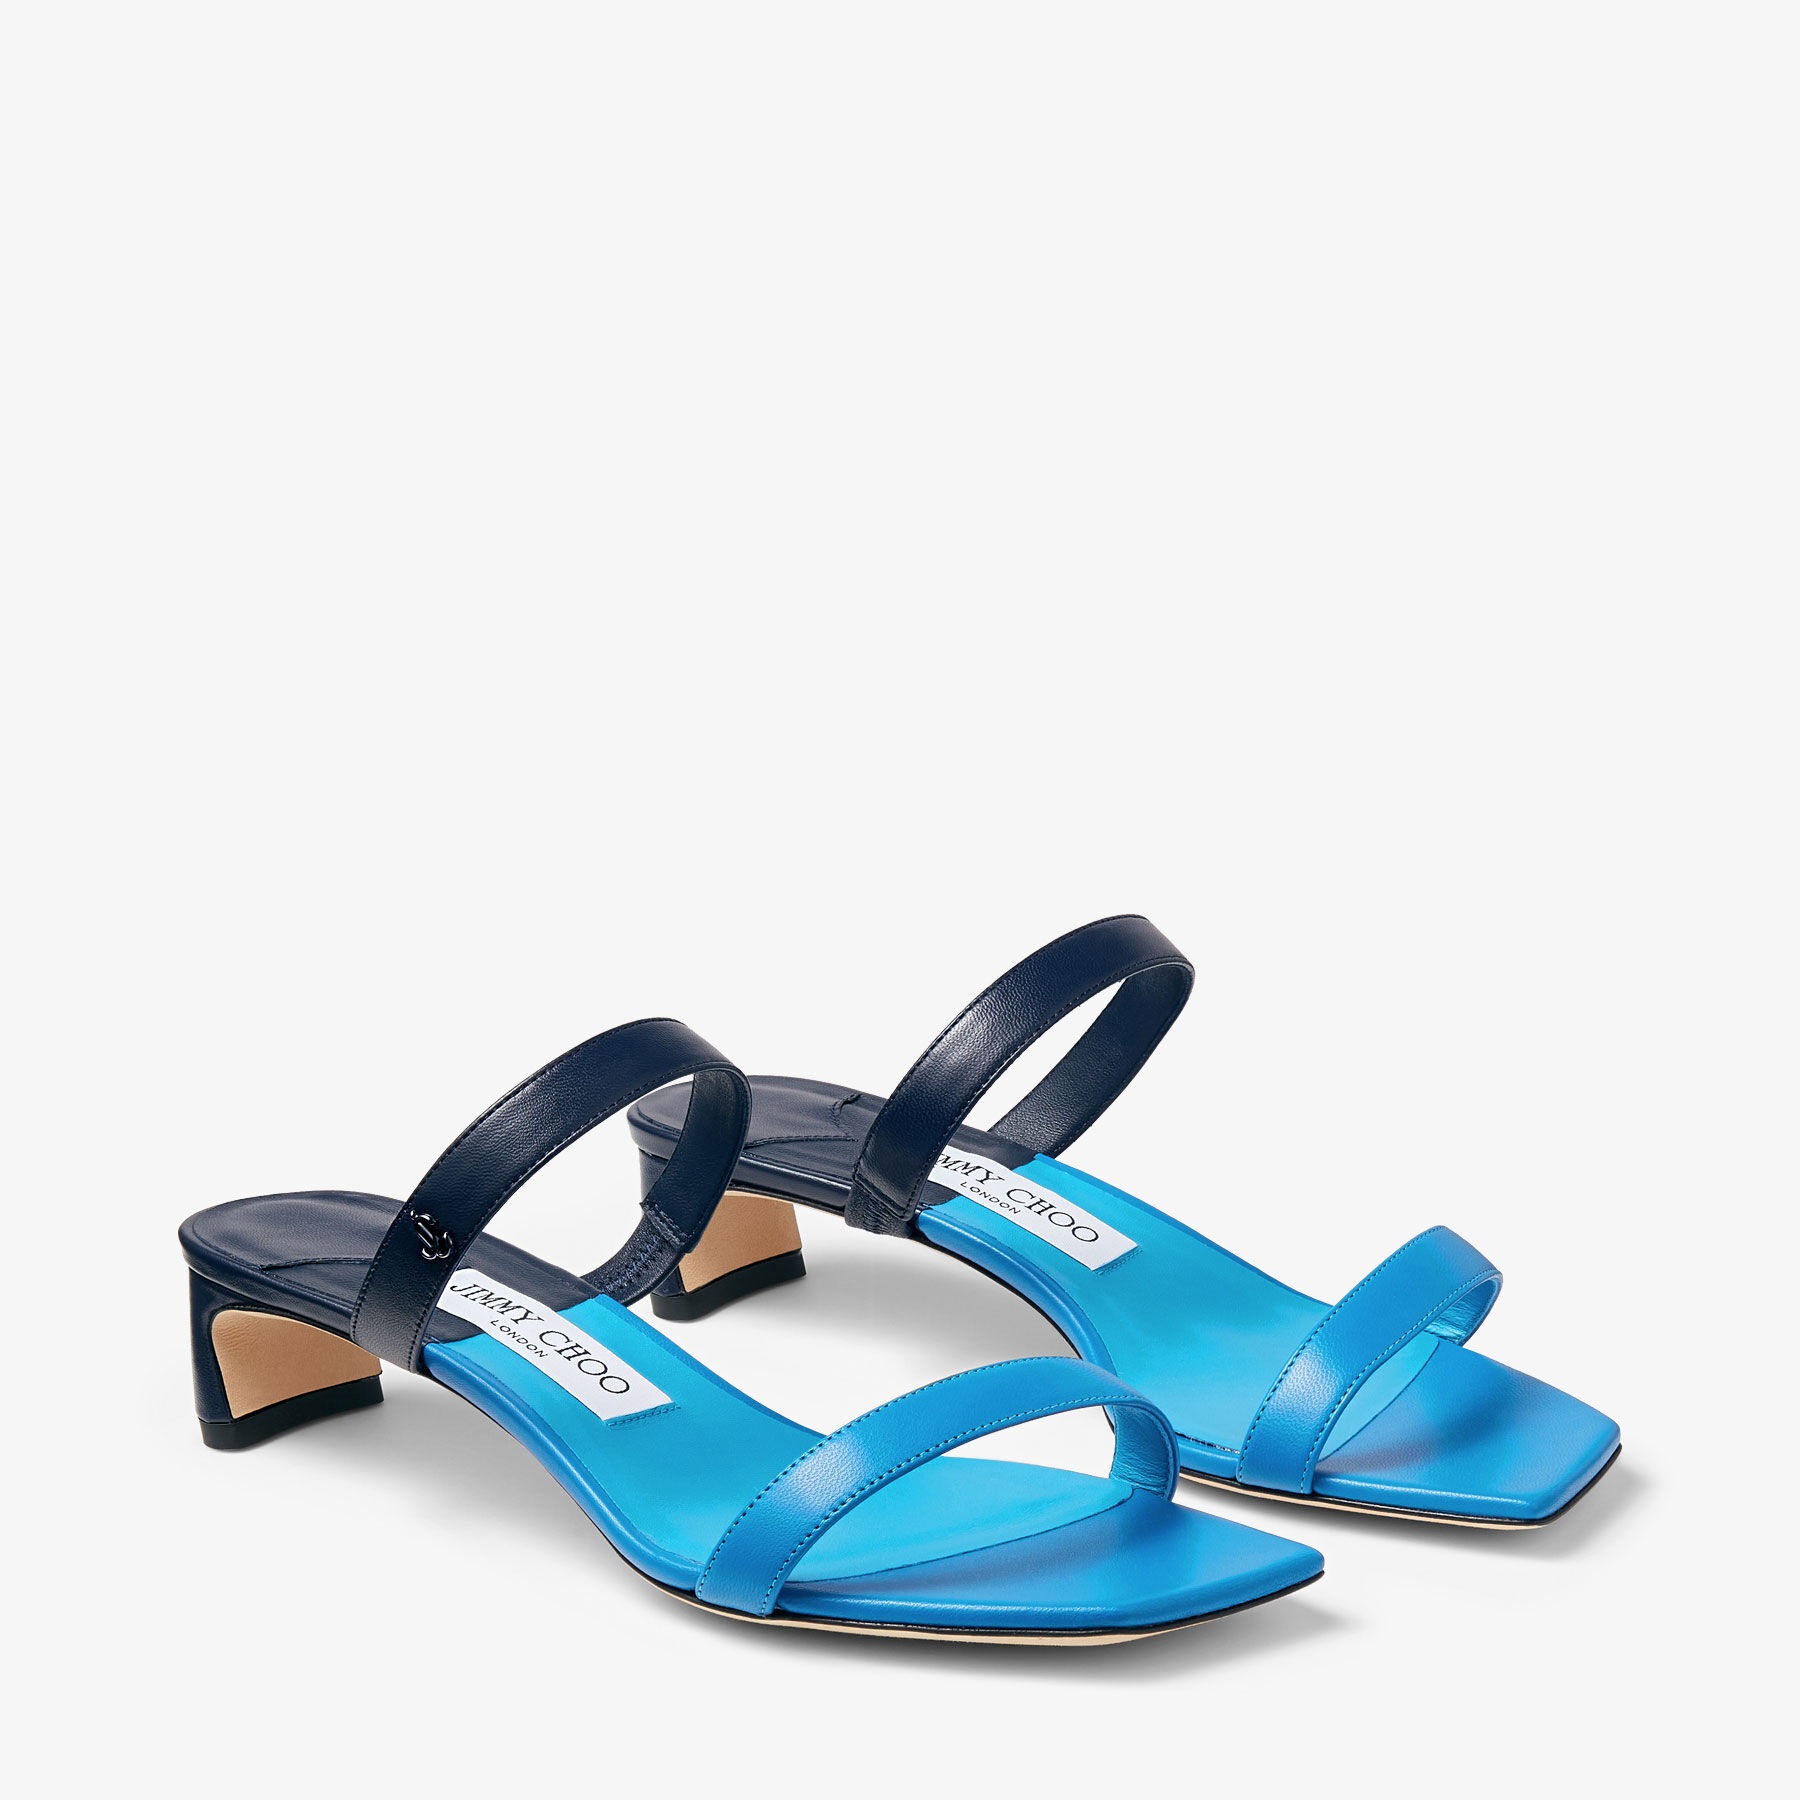 Kyda 35
Sky and Navy Nappa Leather Sandals - 2